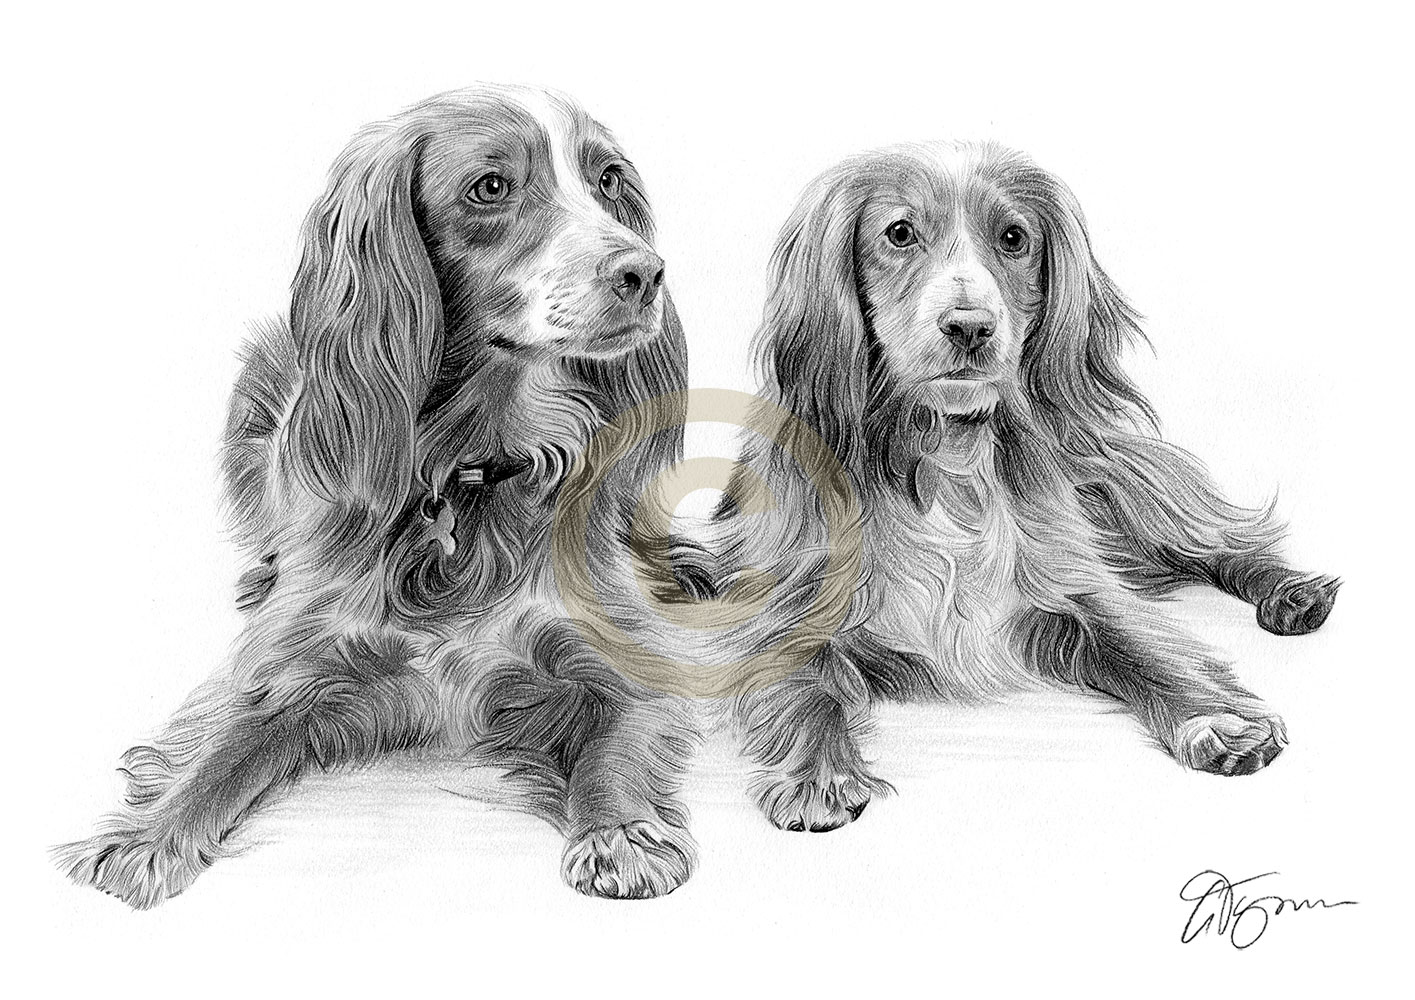 Pencil drawing commission of two spaniels by artist Gary Tymon